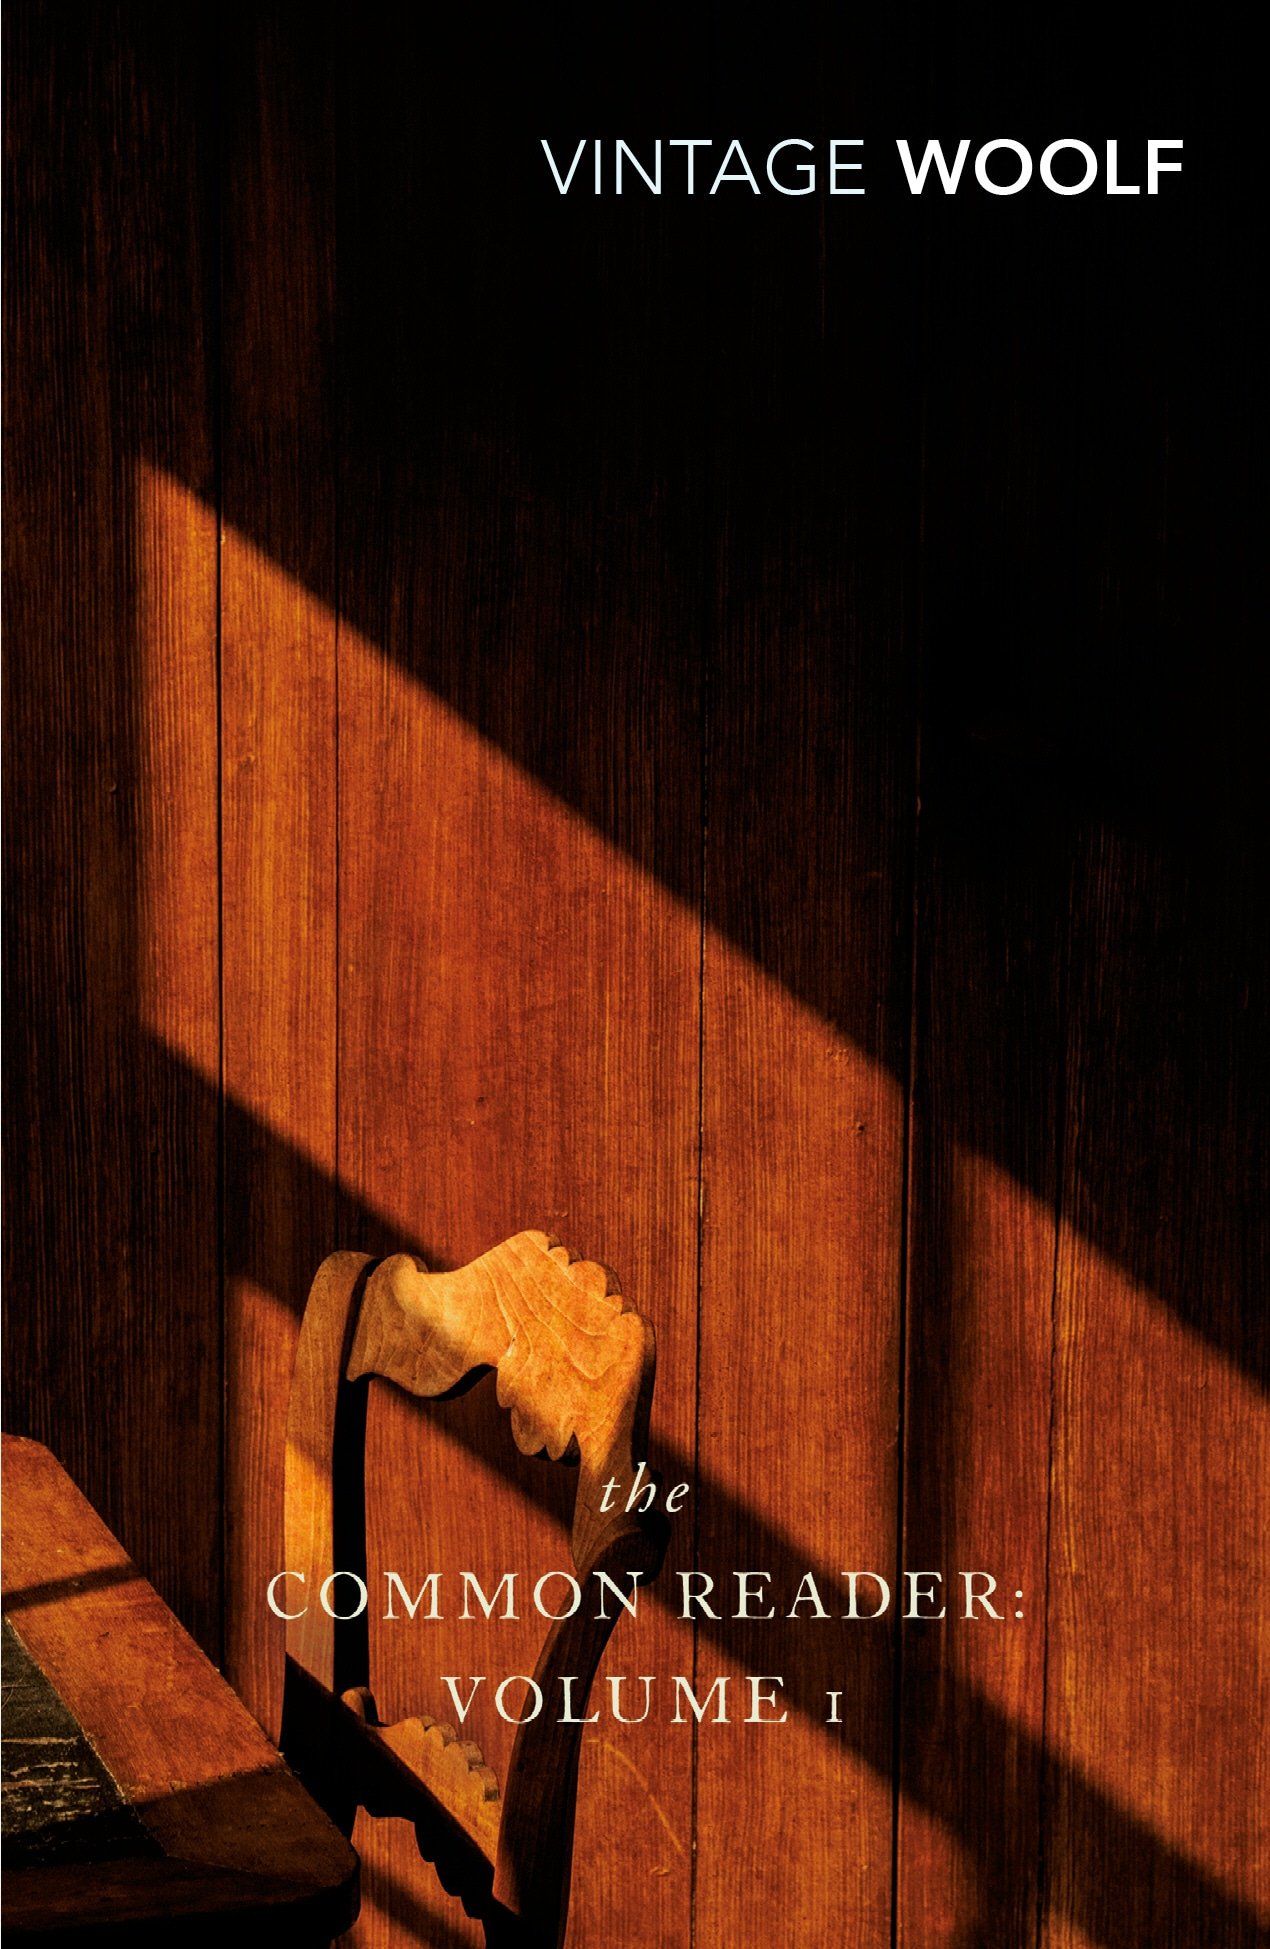 Book “The Common Reader: Volume 1” by Virginia Woolf — January 2, 2003